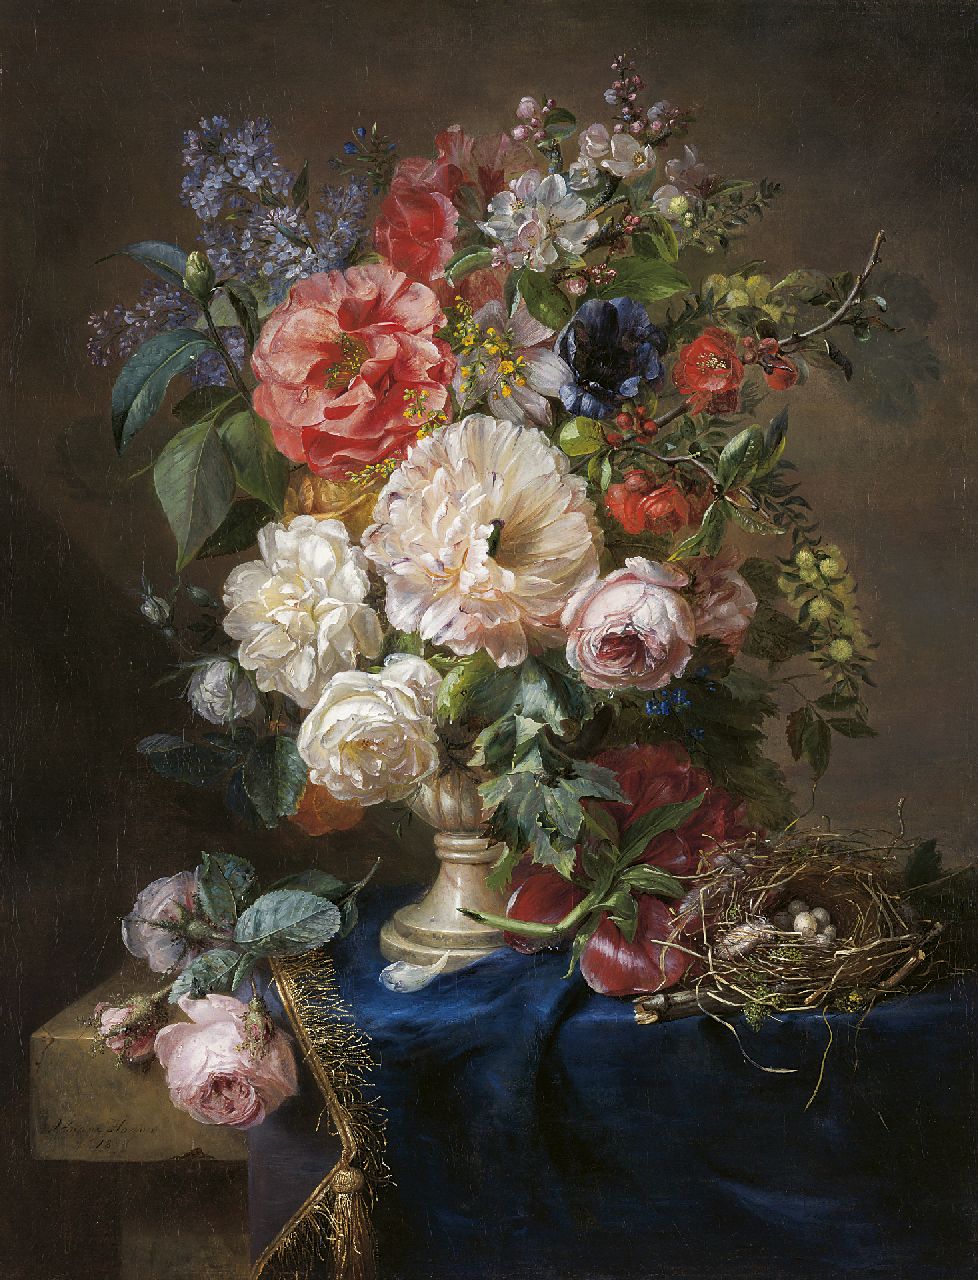 Haanen A.J.  | Adriana Johanna Haanen, Flower still life with roses, lilac and blossom, and a bird's nest, oil on canvas 71.0 x 55.0 cm, signed l.l. and dated 1848